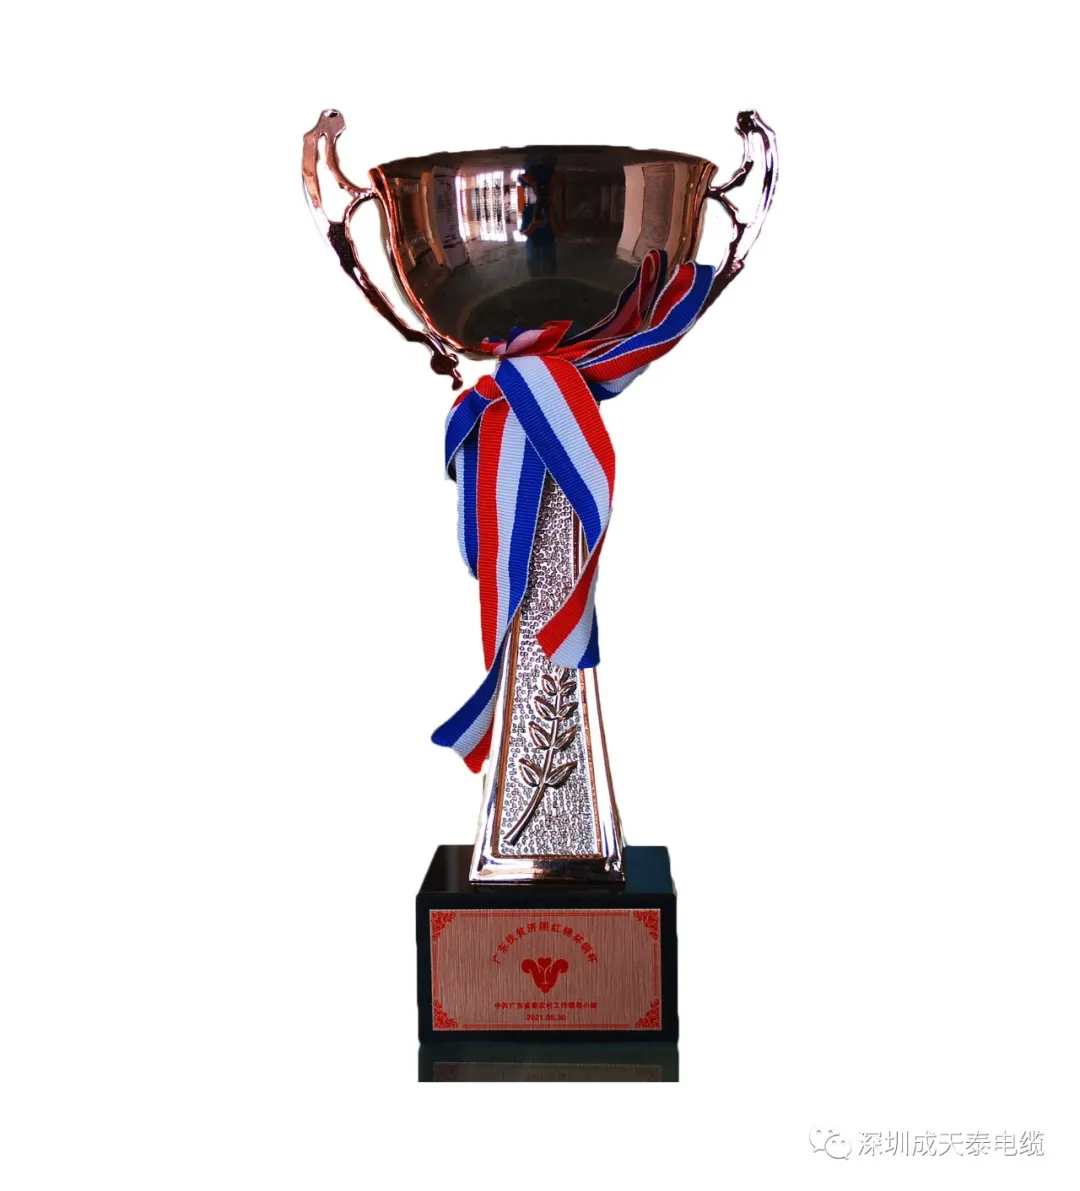 CTT CABLE won the "red cotton cup for poverty alleviation in Guangdong" copper cup